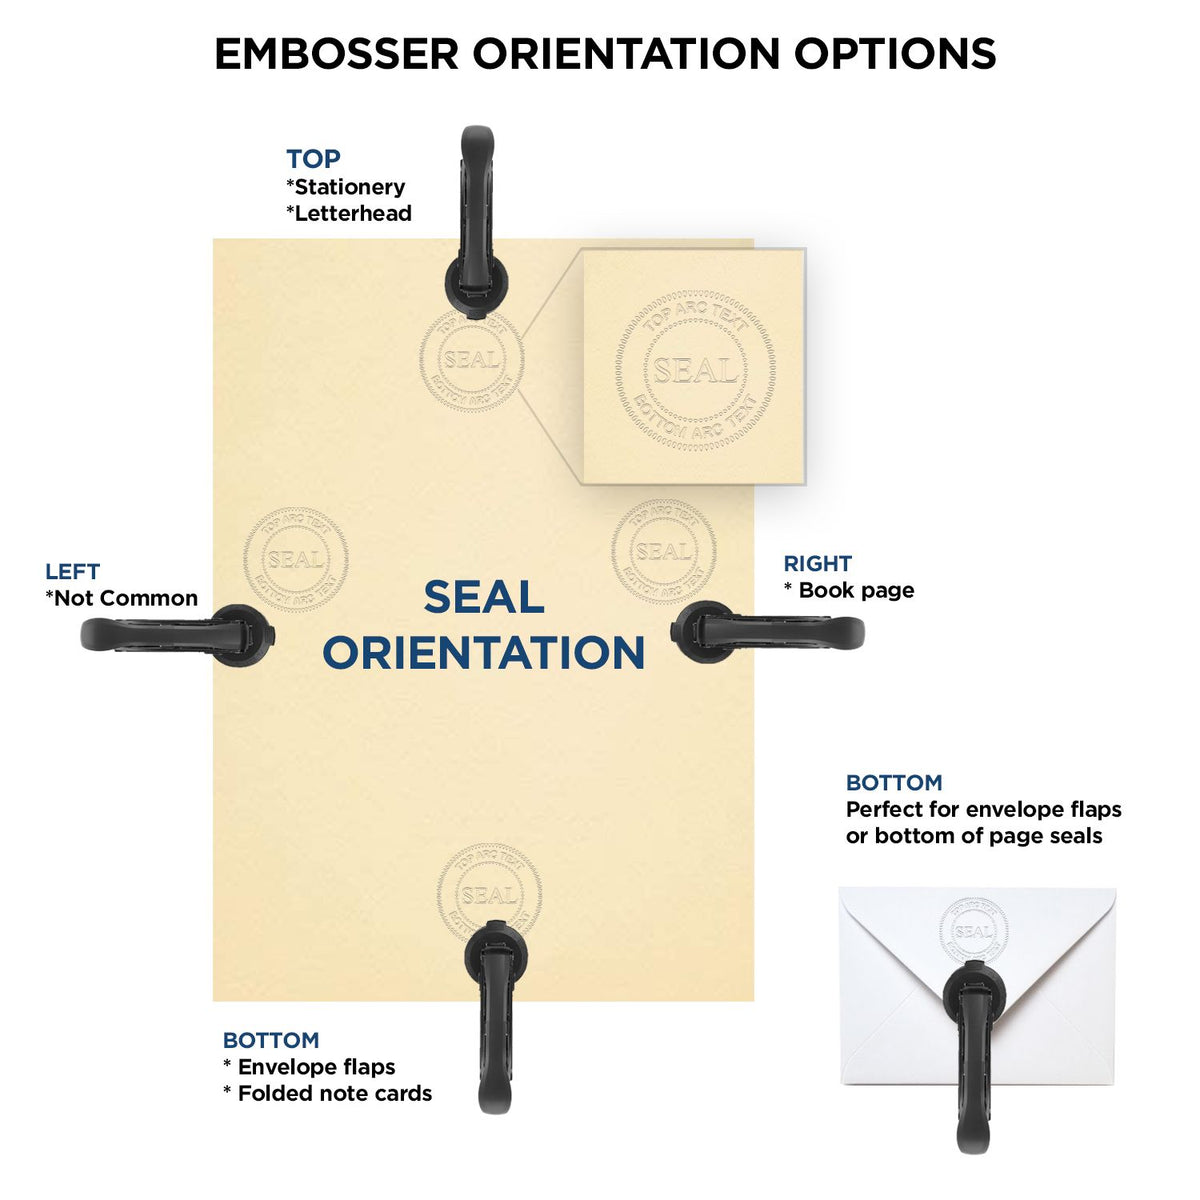 An infographic for the Tennessee Geologist Desk Seal showing embosser orientation, this is showing examples of a top, bottom, right and left insert.